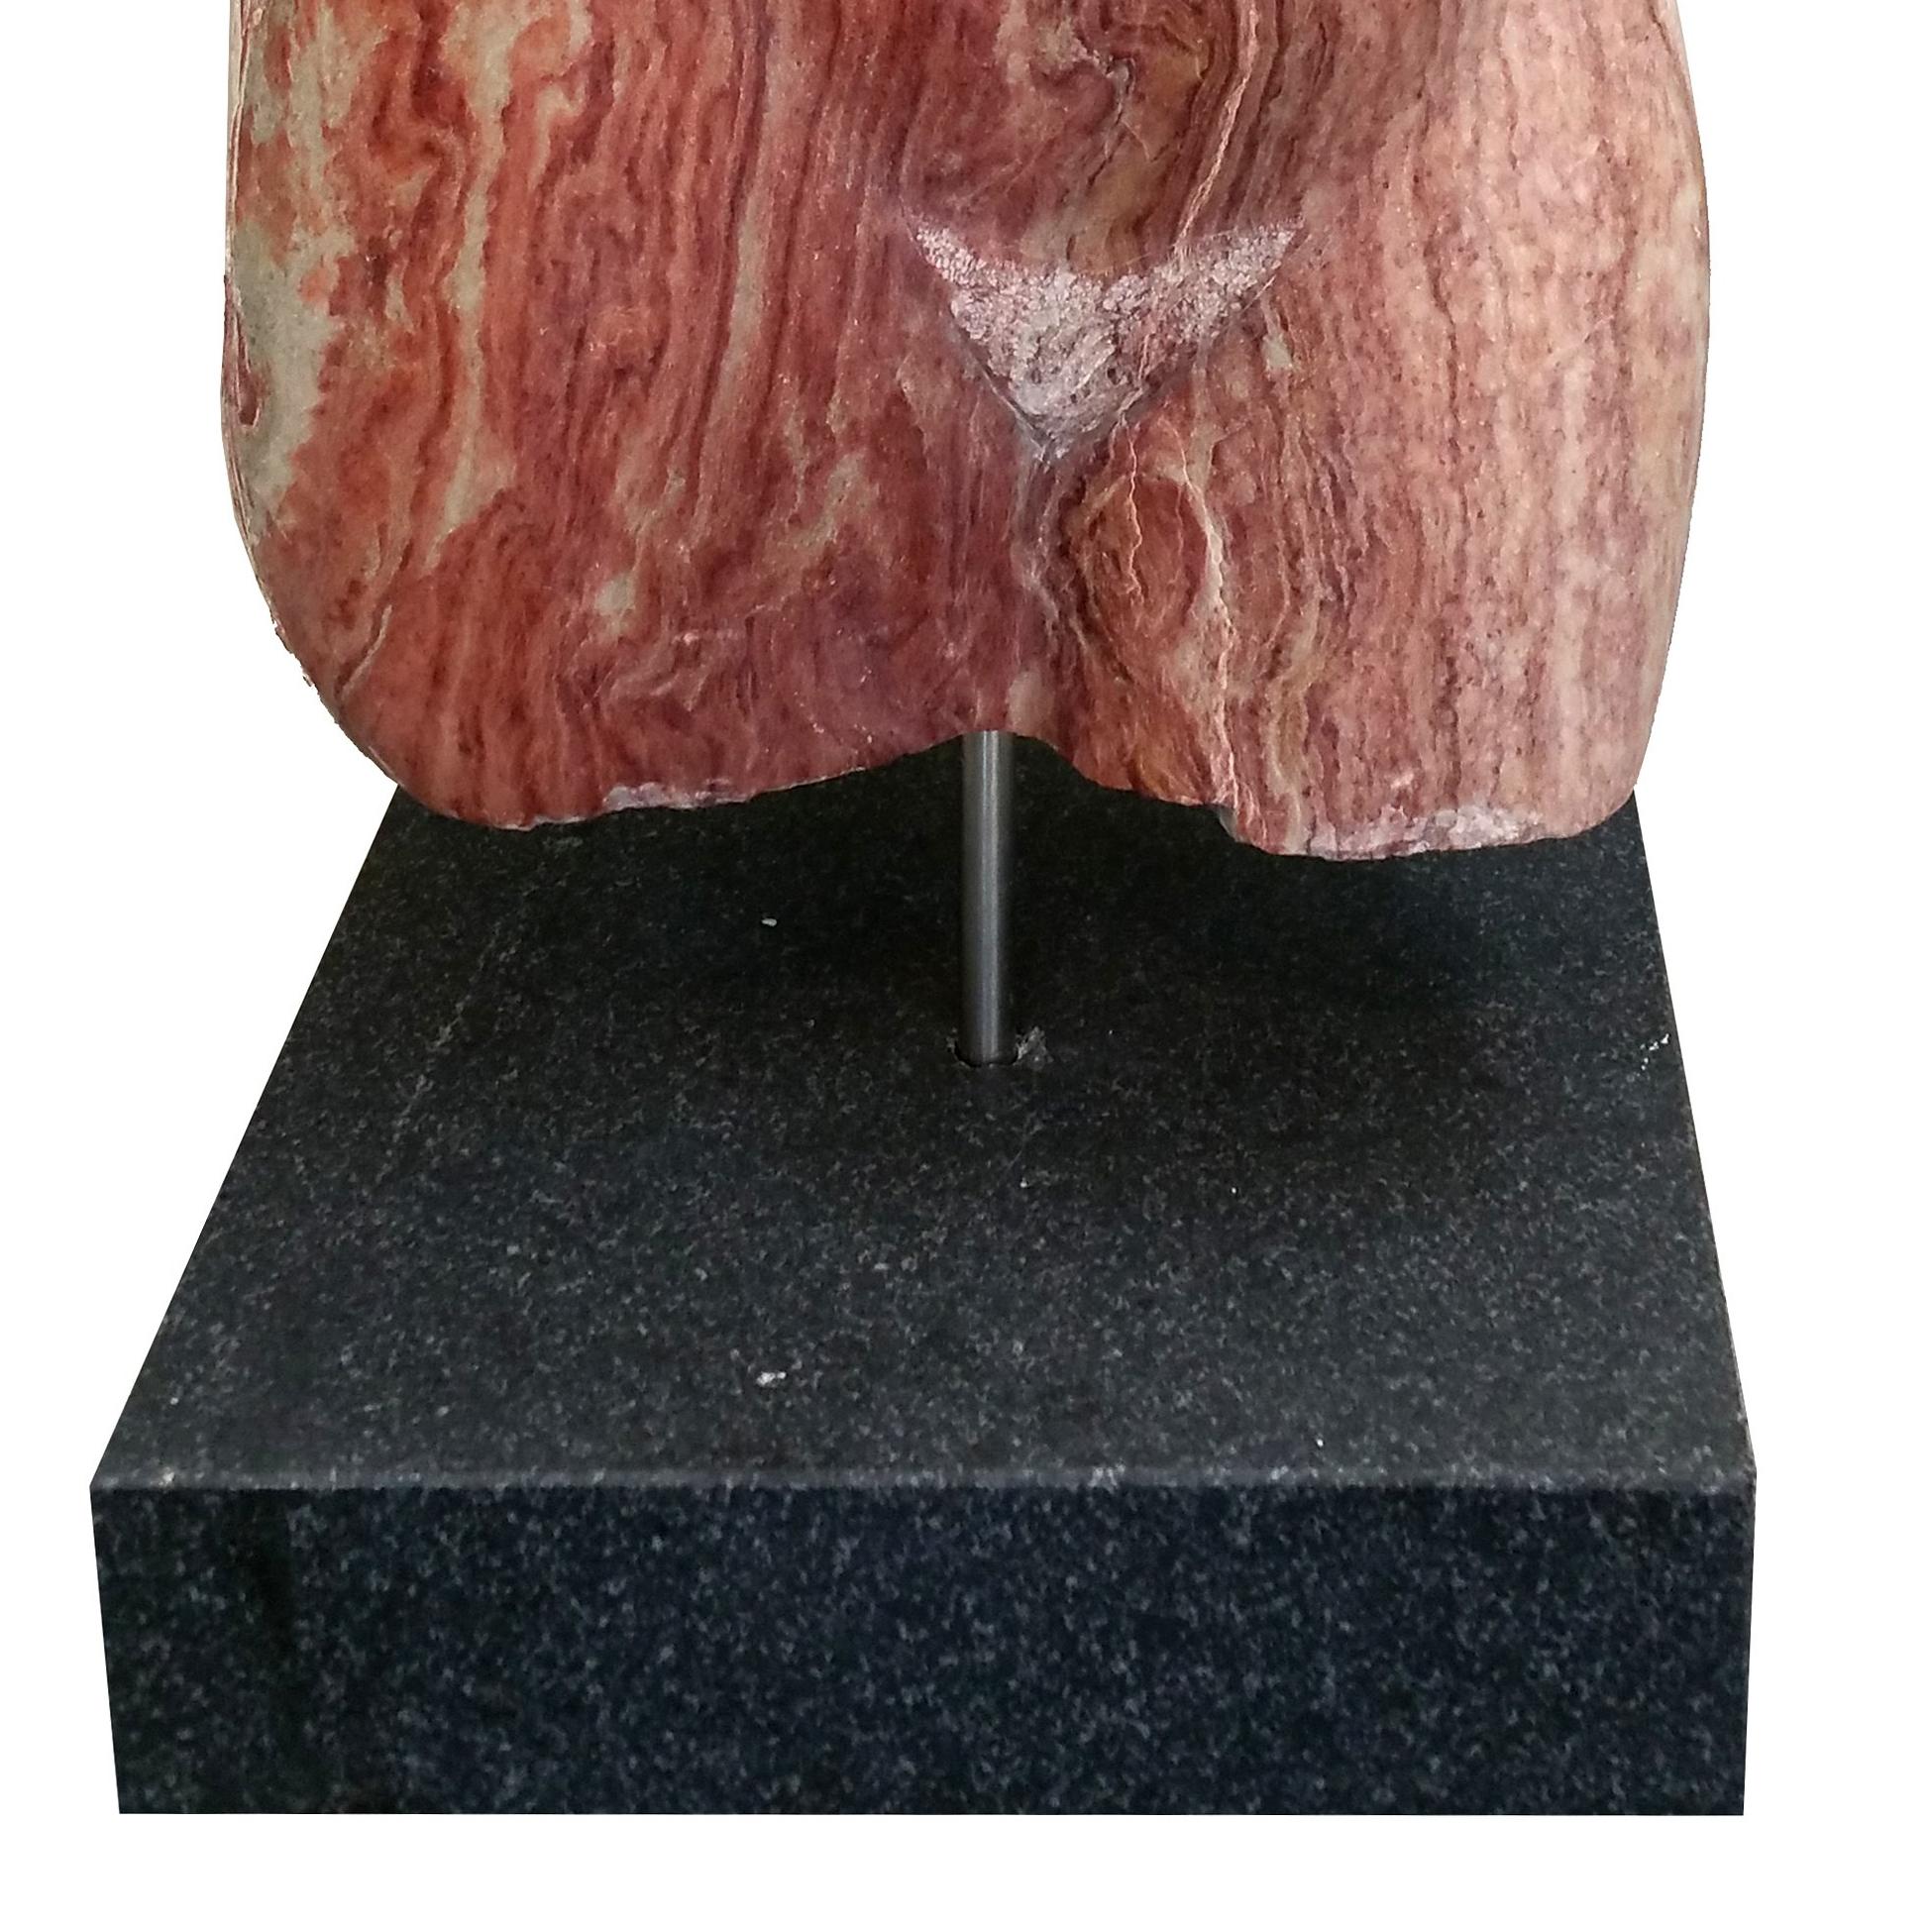 Rose Torso - Abstract Impressionist Sculpture by Joseph Sovella